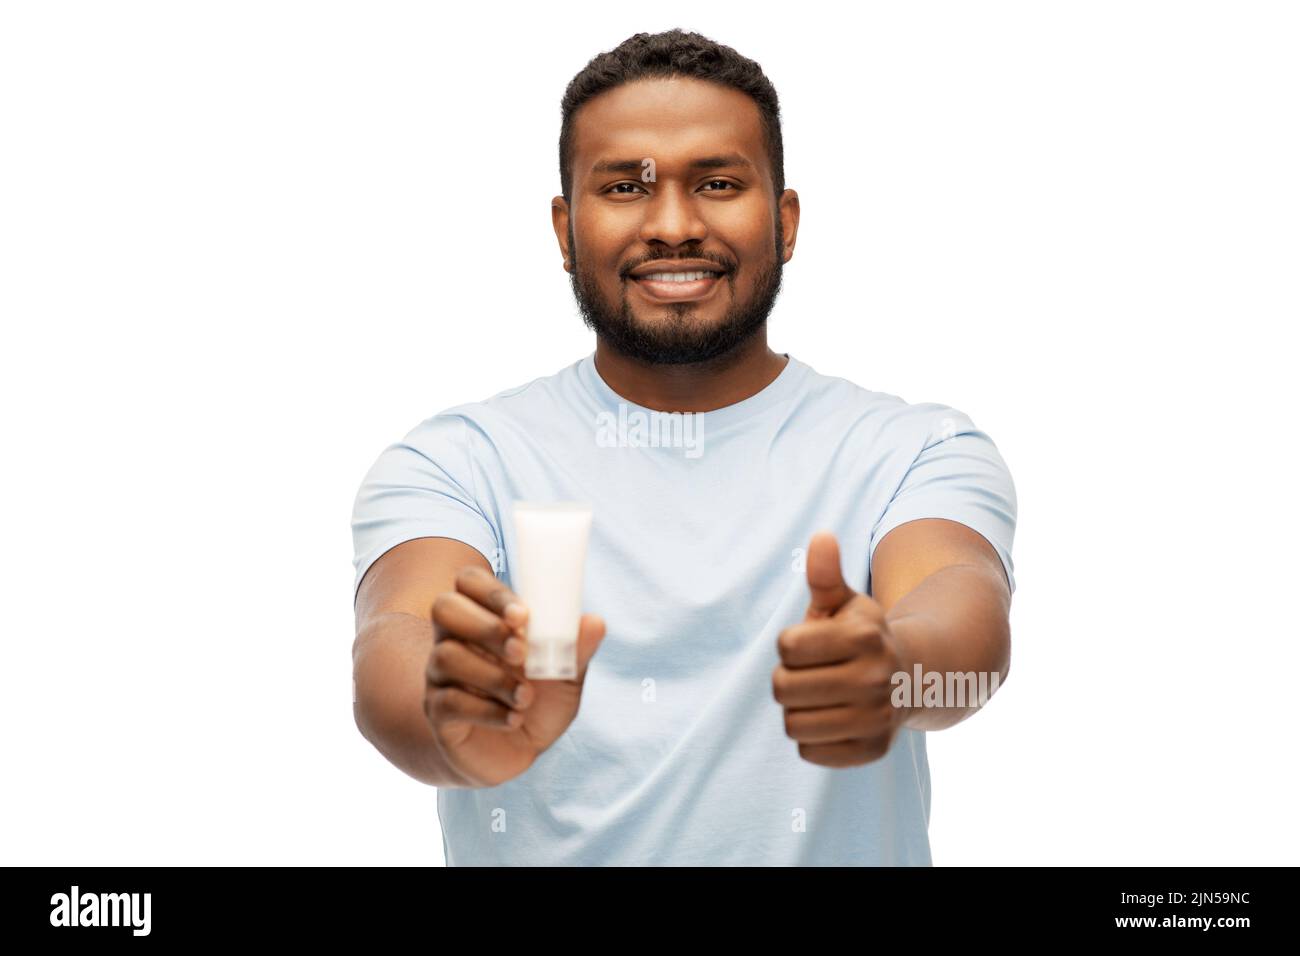 african man with moisturizer showing thumbs up Stock Photo